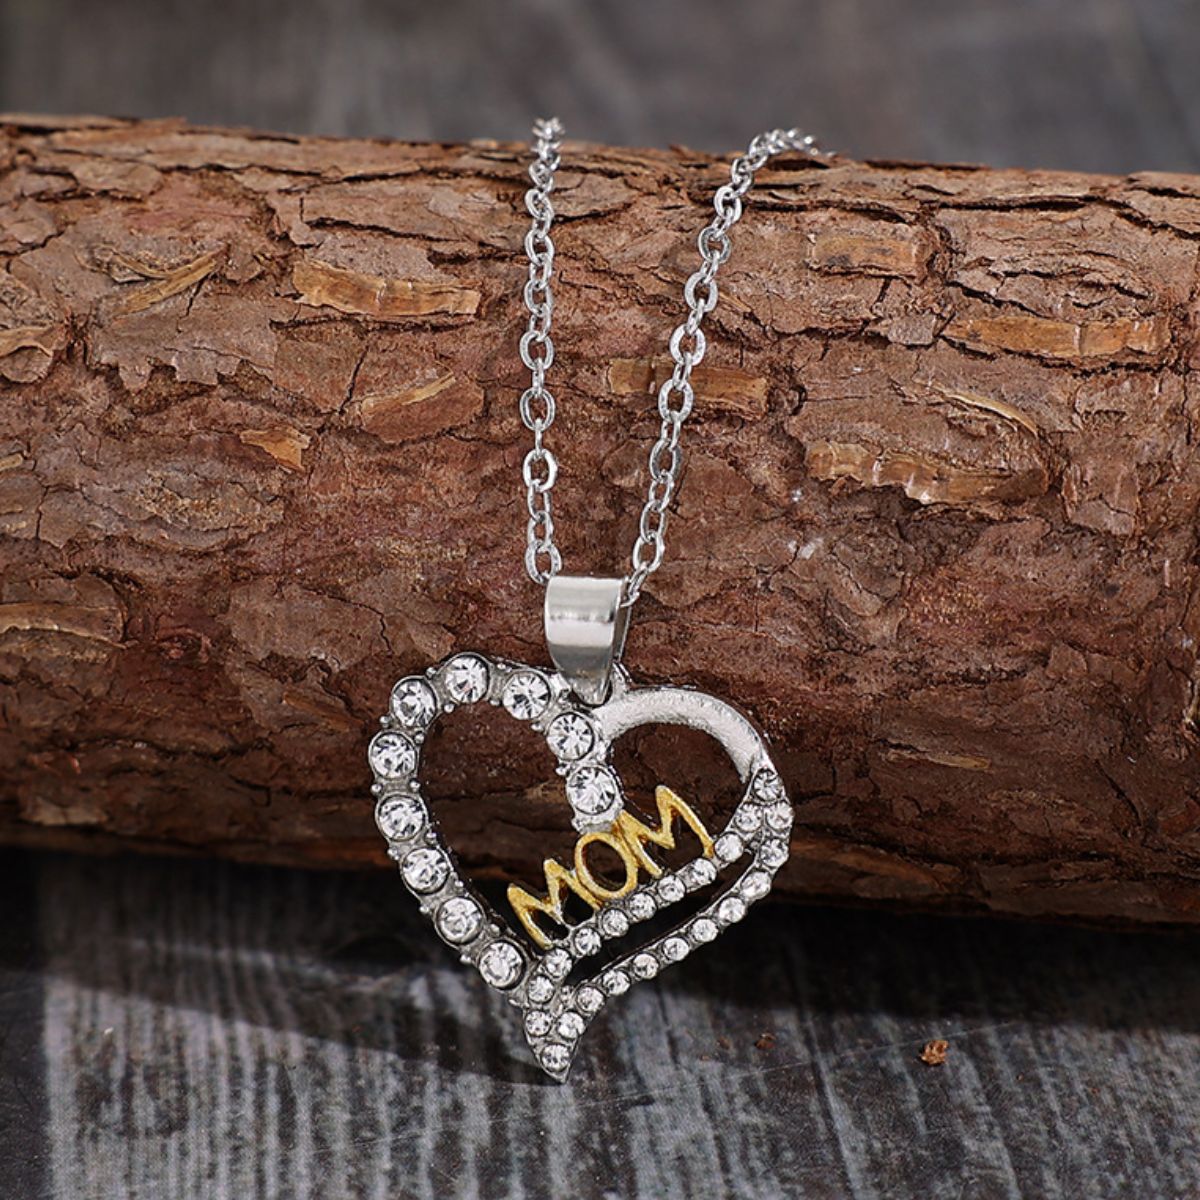 Charming 'Mom' heart pendant necklace with crystals on a rustic wooden backdrop.